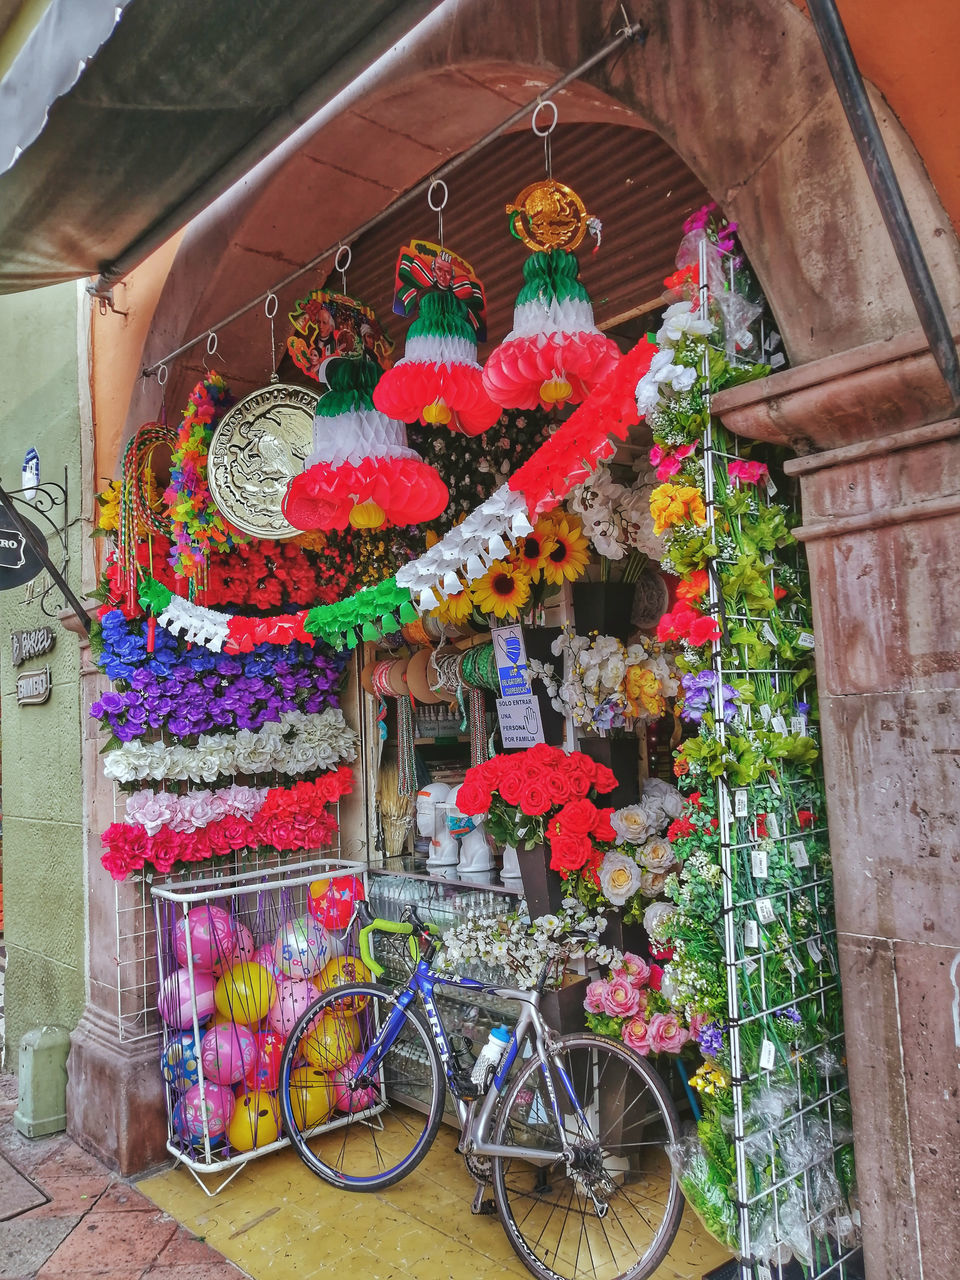 multi colored, architecture, bicycle, flower, flowering plant, no people, building exterior, built structure, day, art, plant, decoration, transportation, outdoors, nature, city, building, retail, hanging, small business, travel